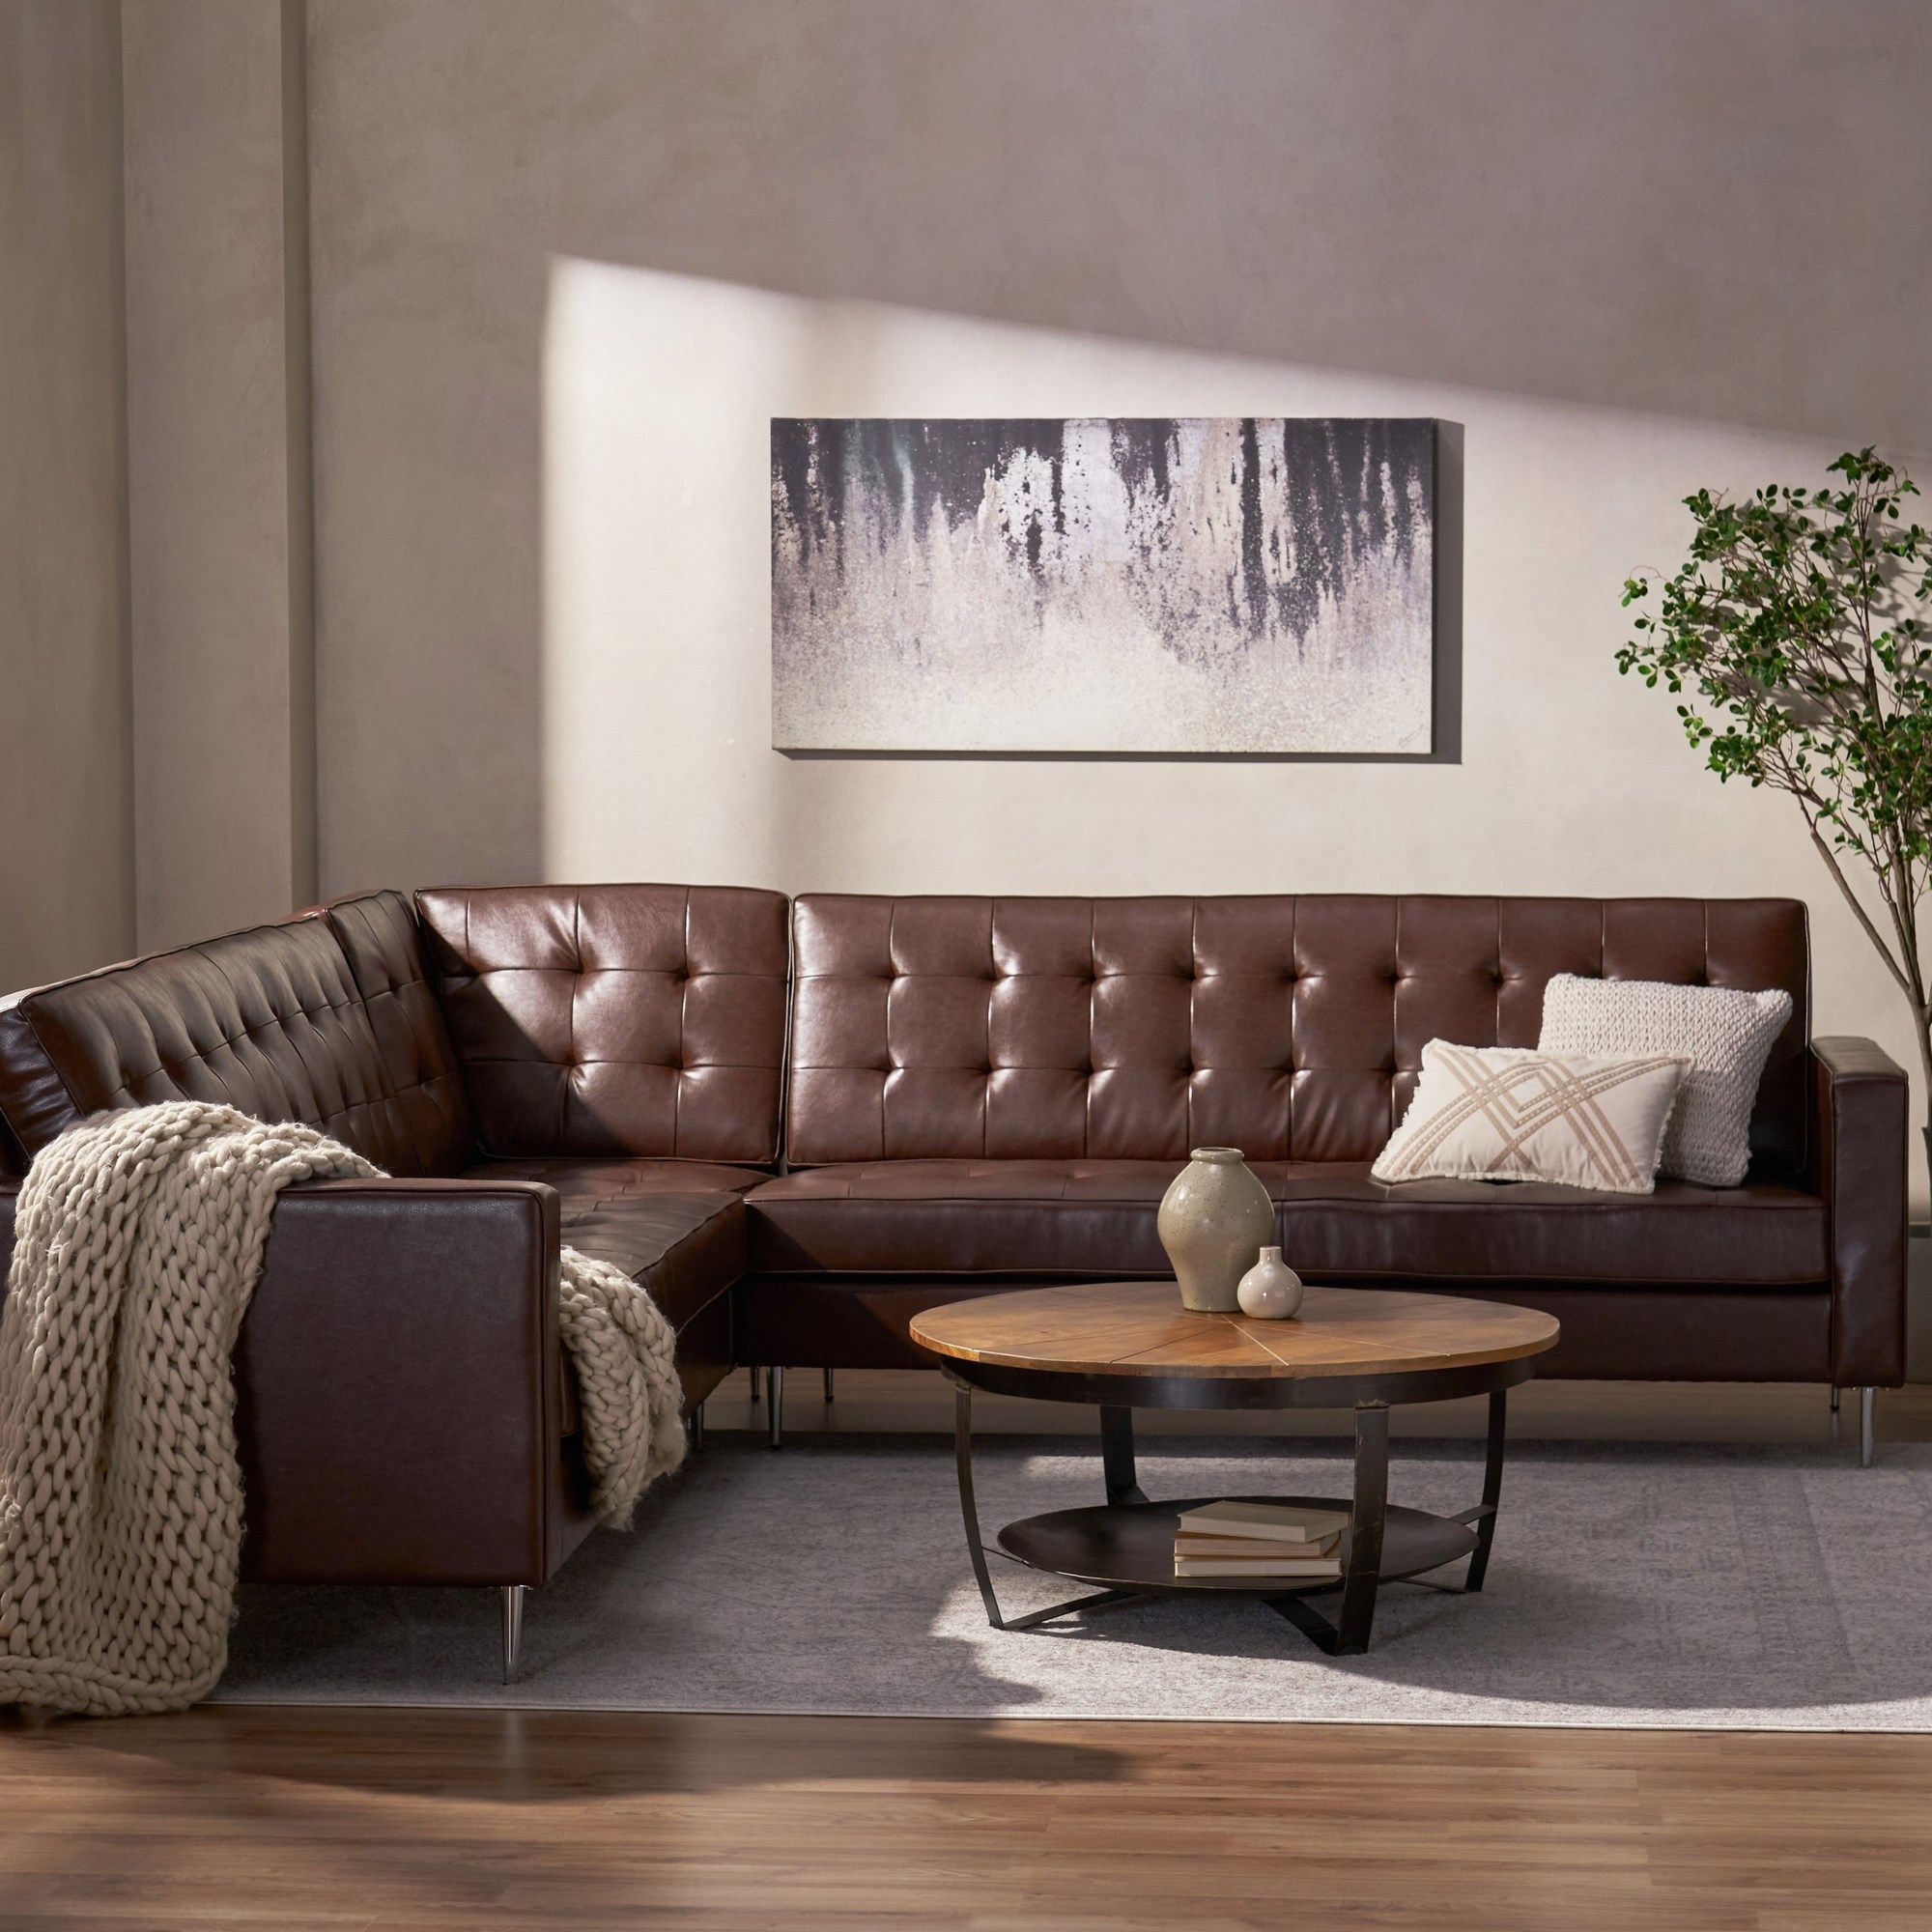 Gebo Contemporary Faux Leather Tufted 5 Seater Sectional Sofa Set, Dark  Brown And Chrome With Regard To Faux Leather Sectional Sofa Sets (View 4 of 15)